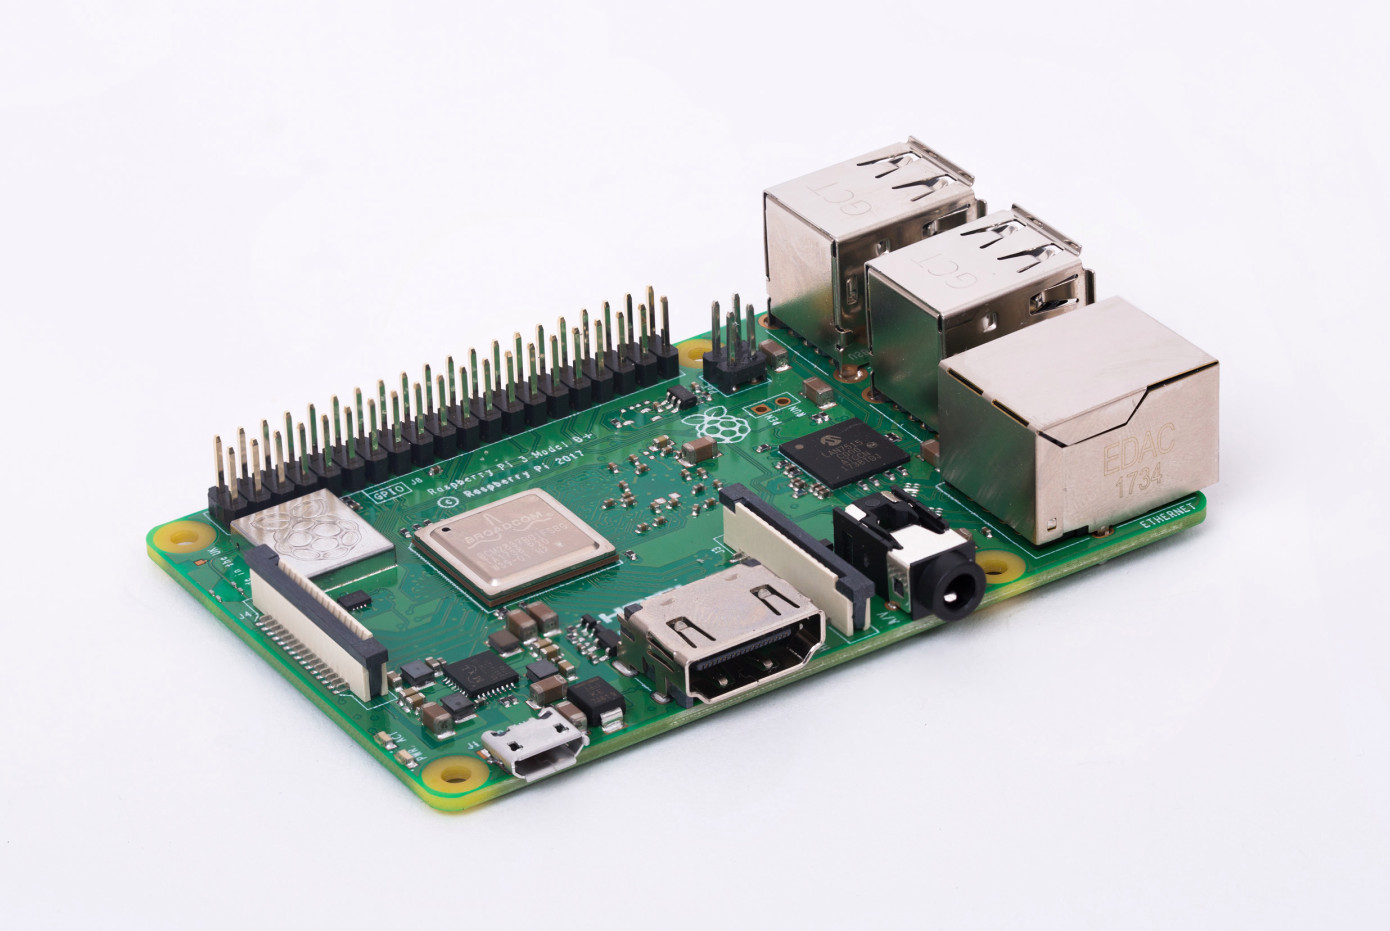 The New Raspberry Pi 3 Model B+ Offers More Power, More Speed and Faster Ethernet